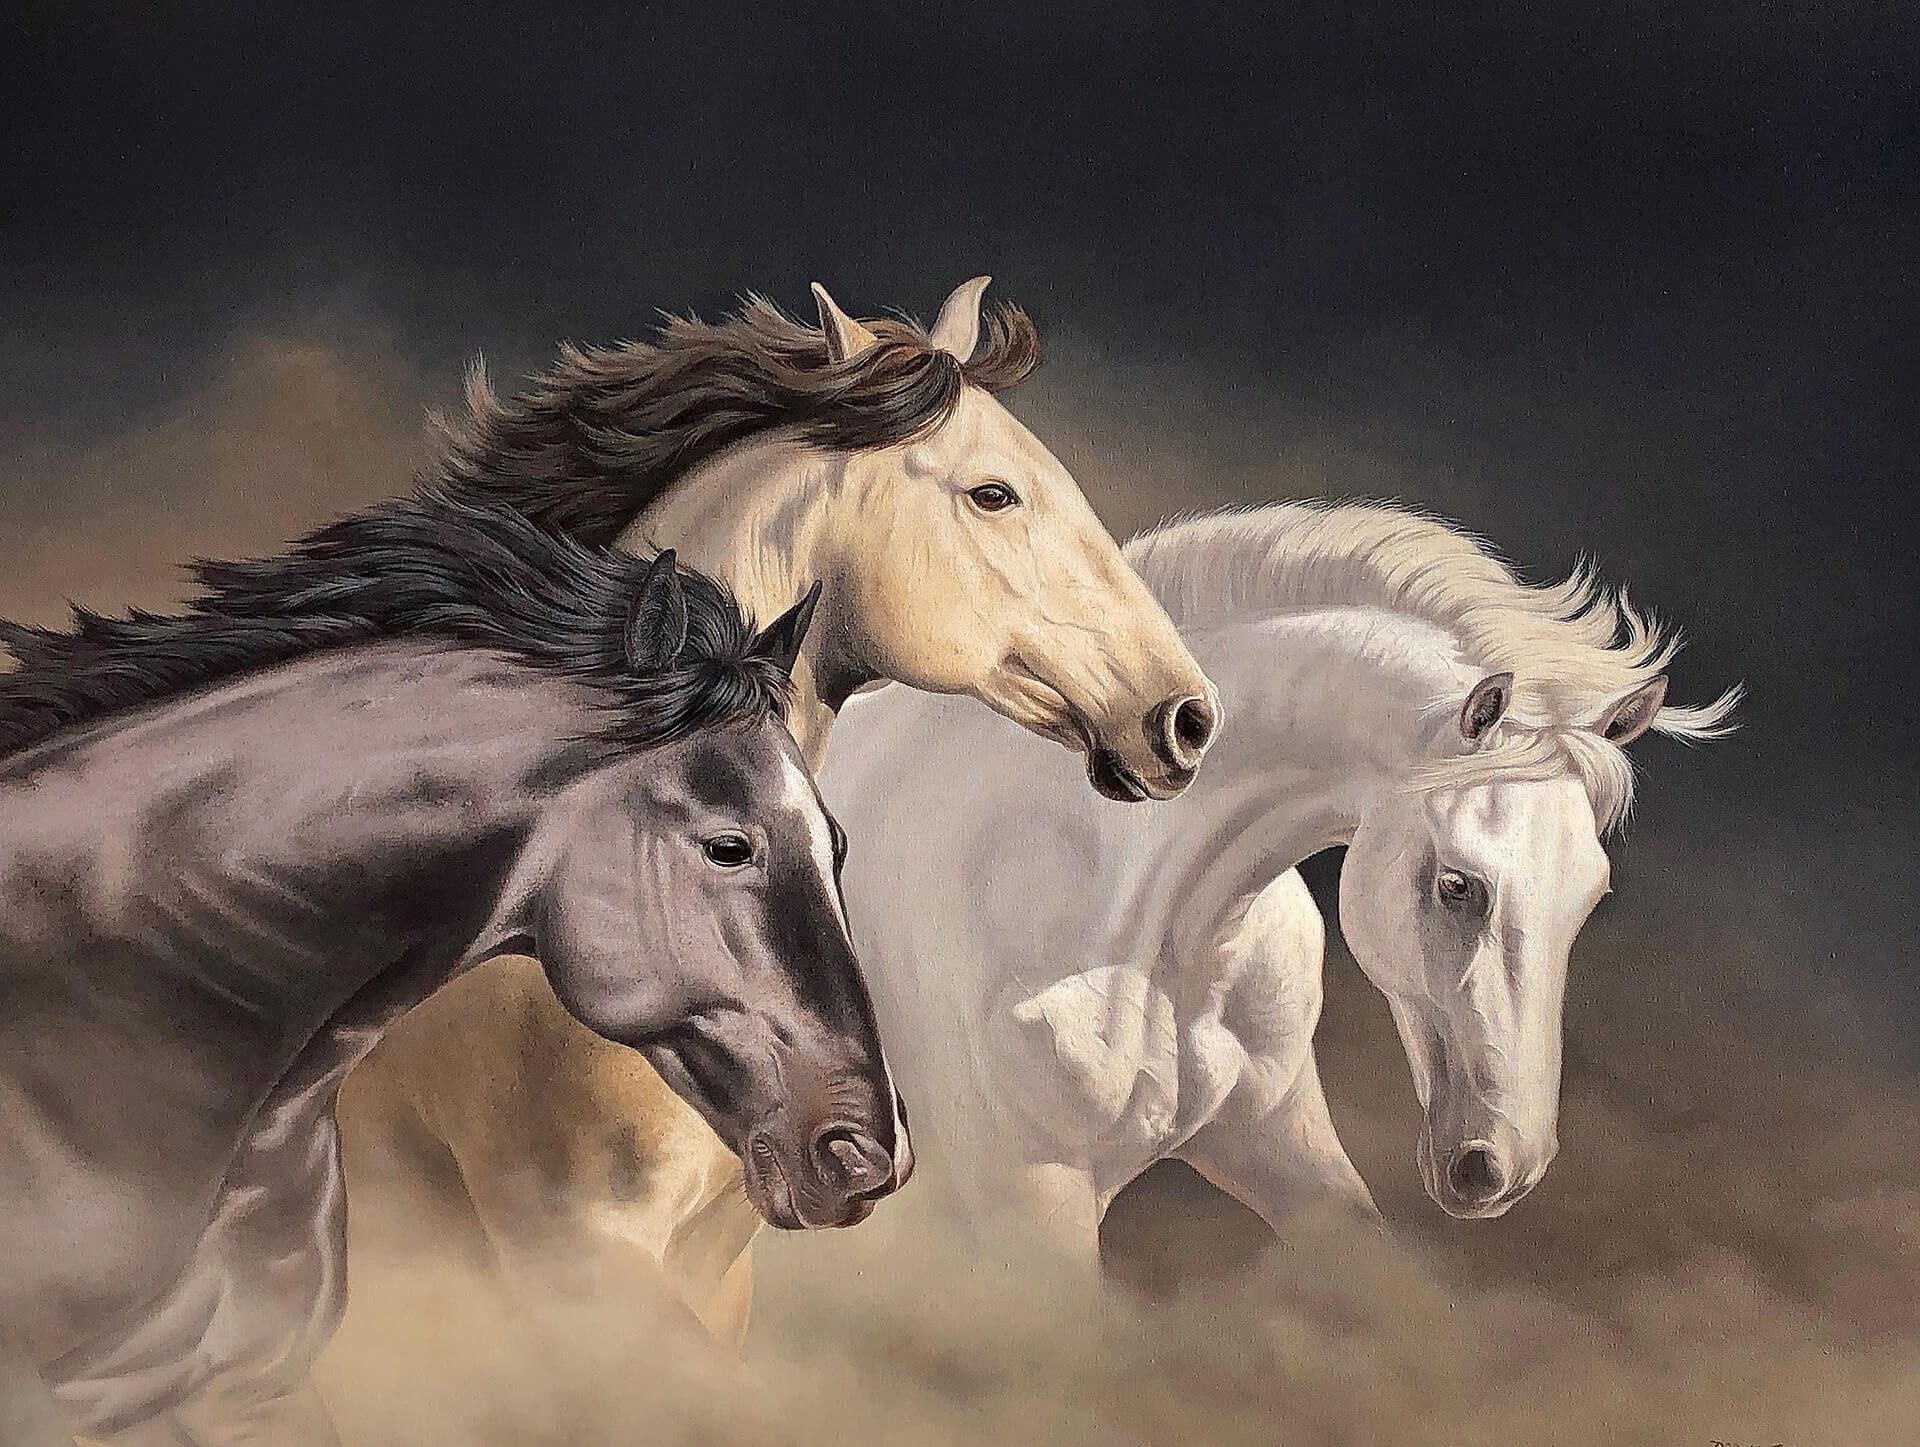 Photorealistic painting of horses galloping